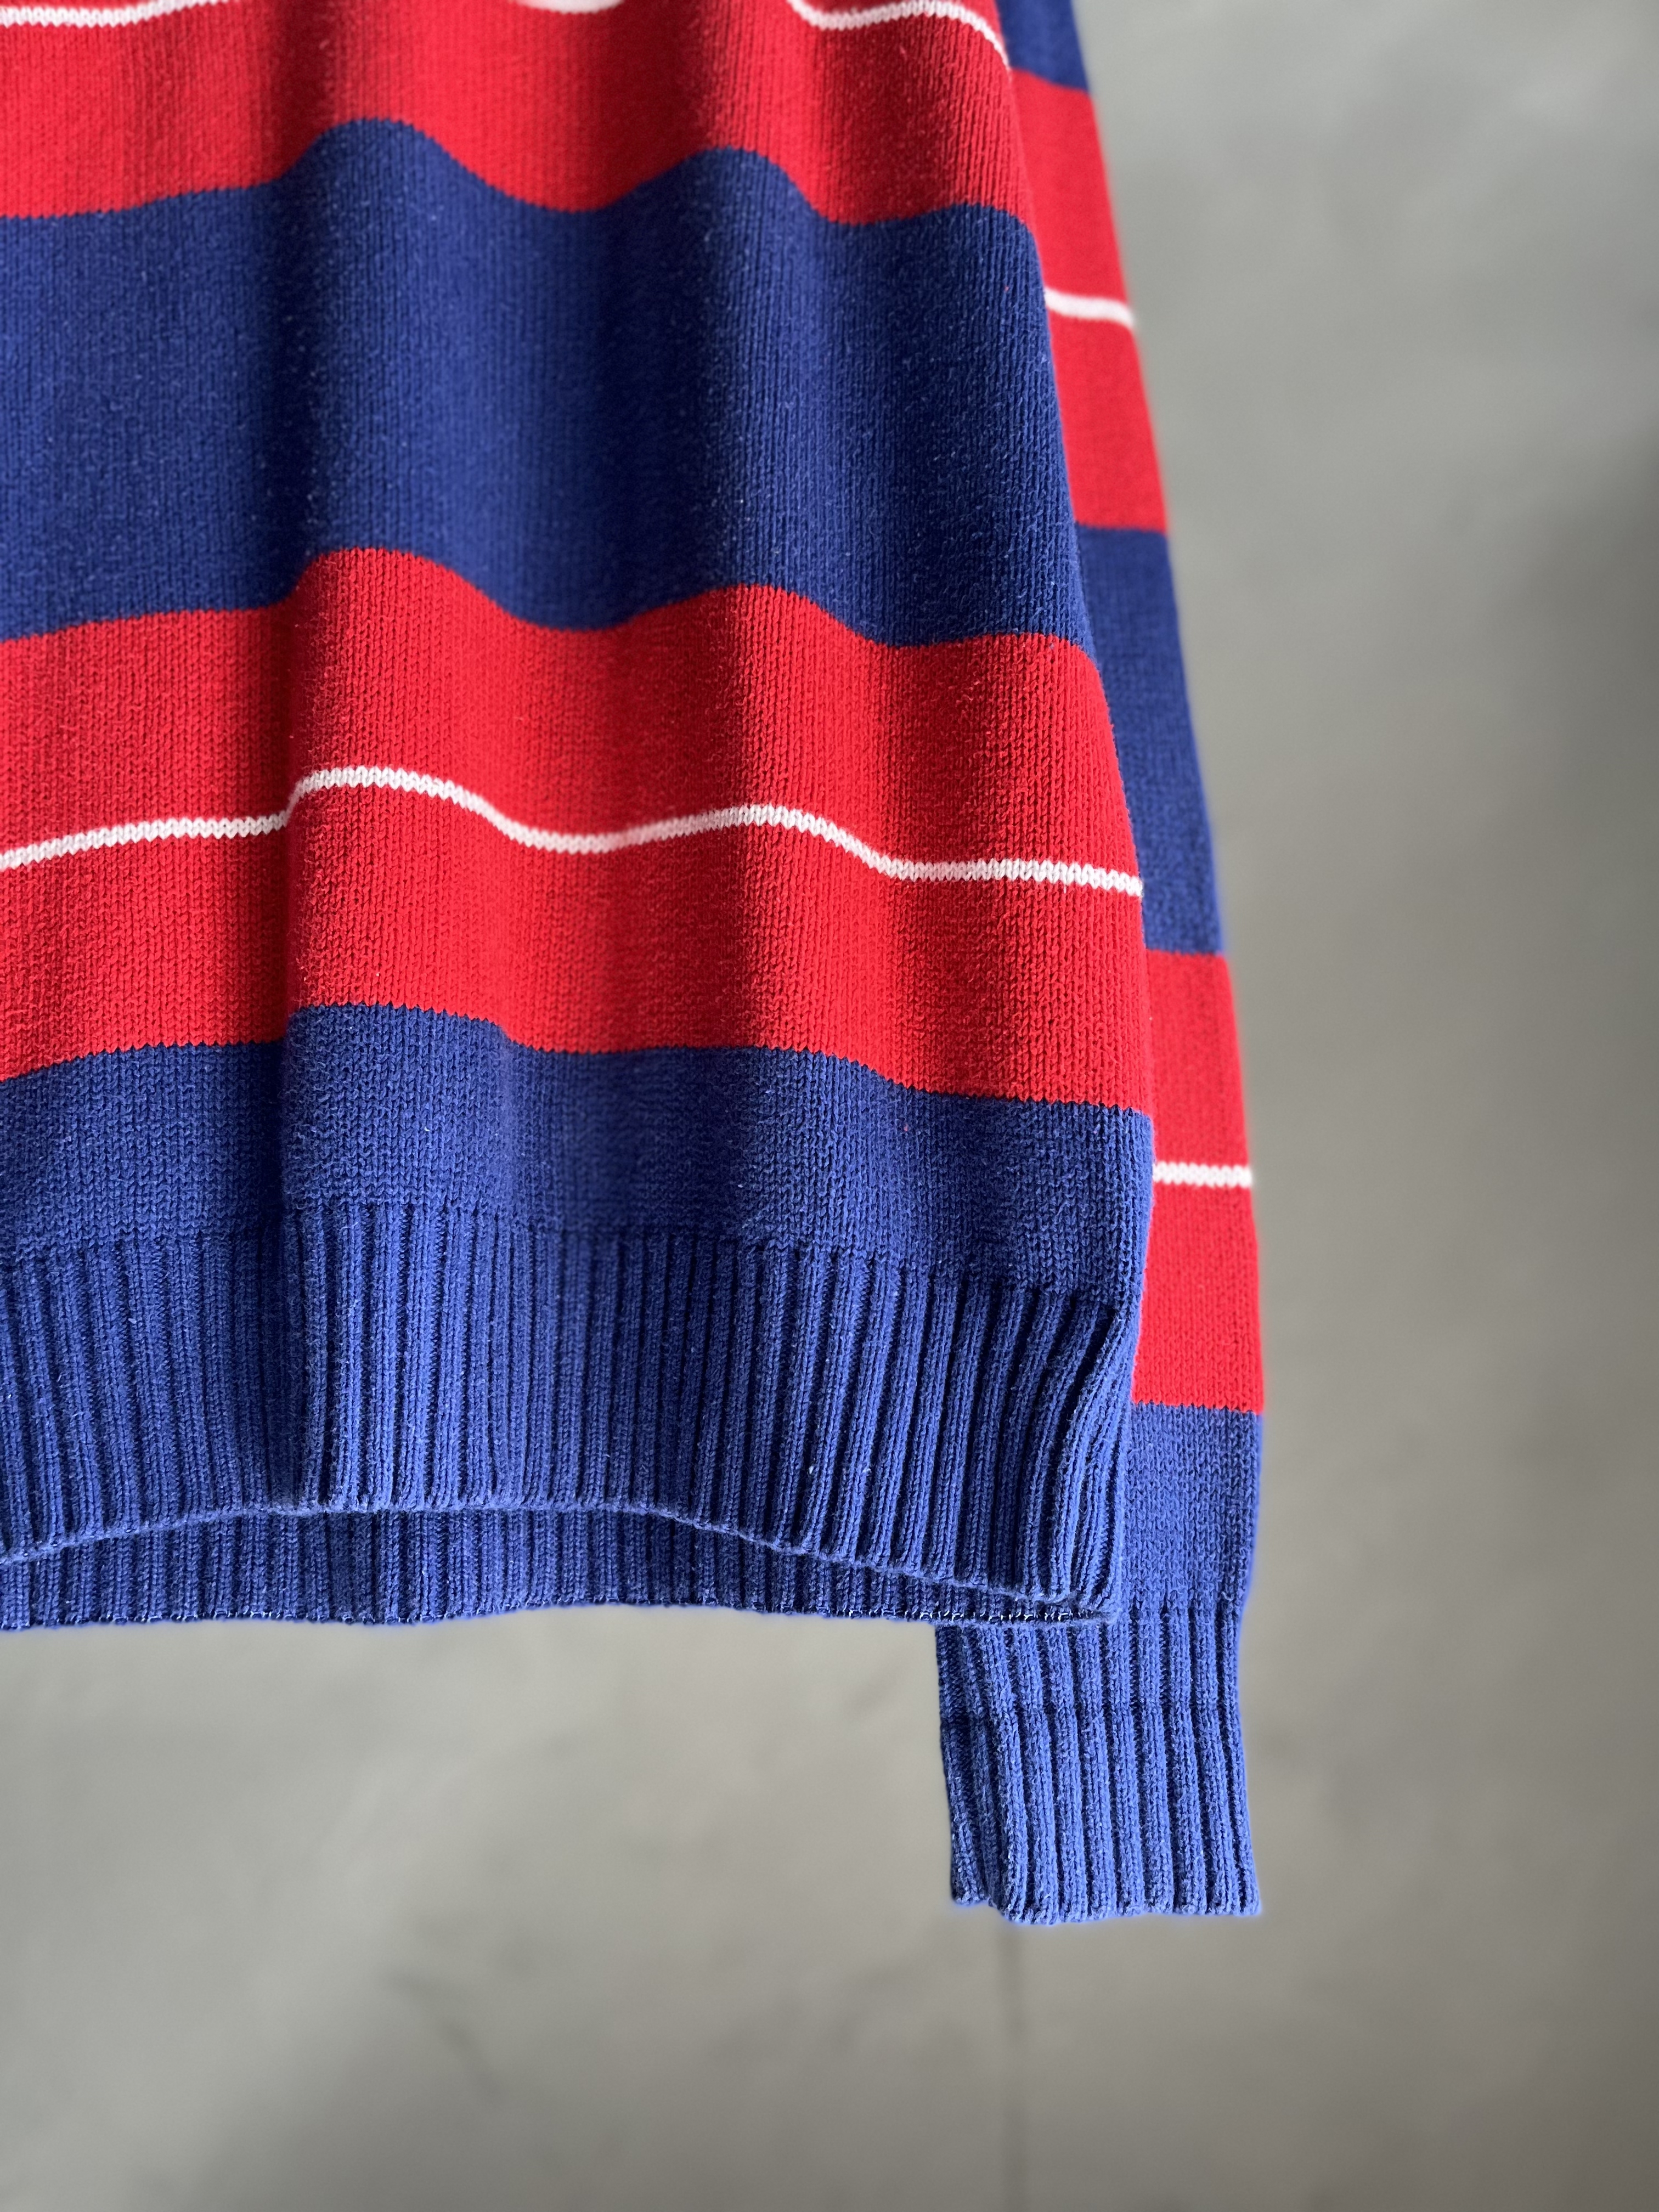 red&blue border pattern cotton sweater